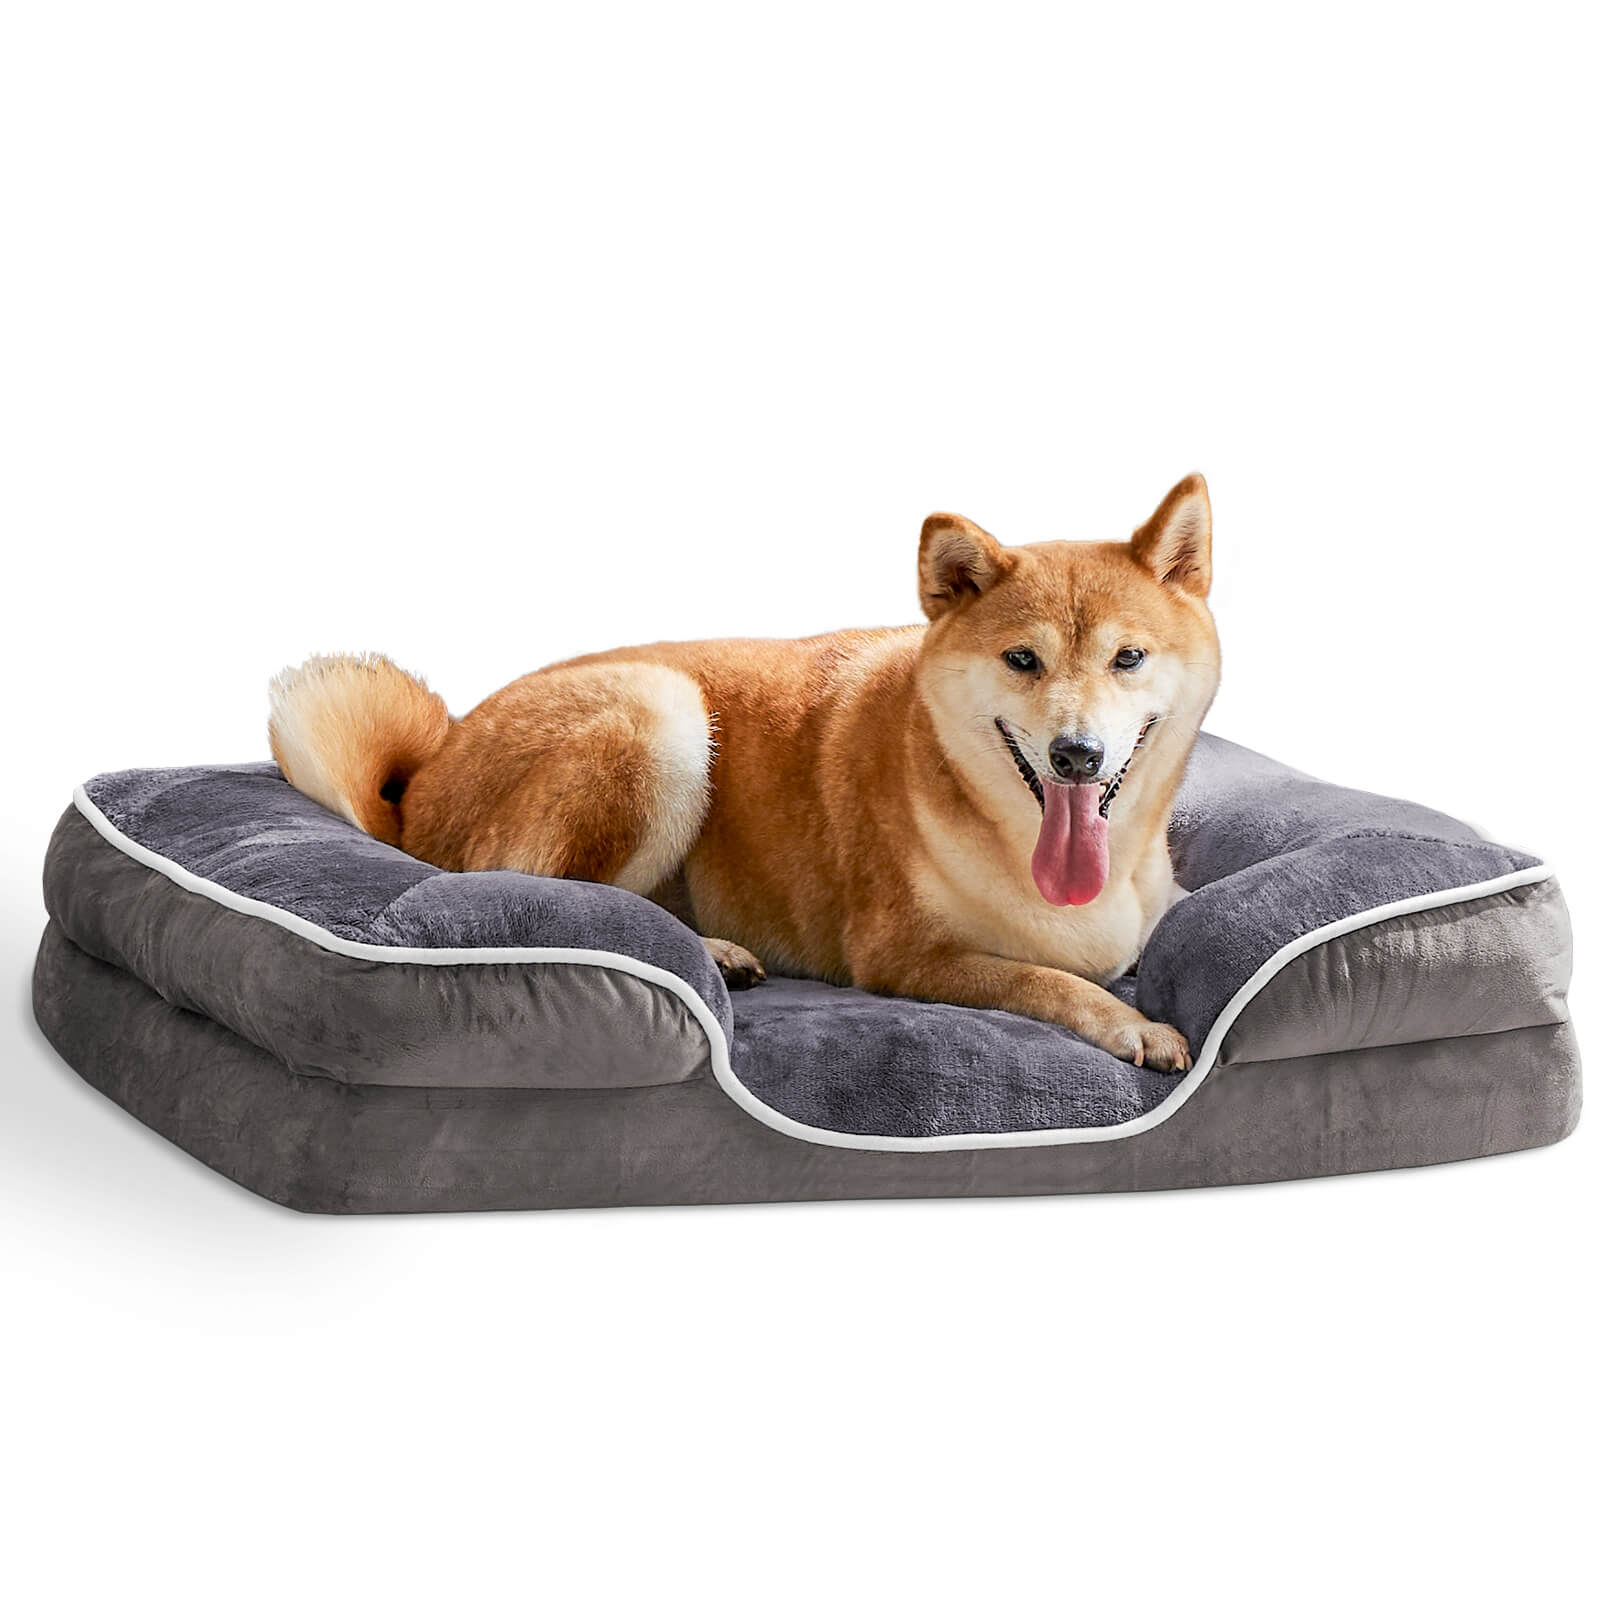 Rectangular dog bed, machine washable sleeper sofa with non-slip bottom Breathable and soft puppy bed for large, medium and small dogs